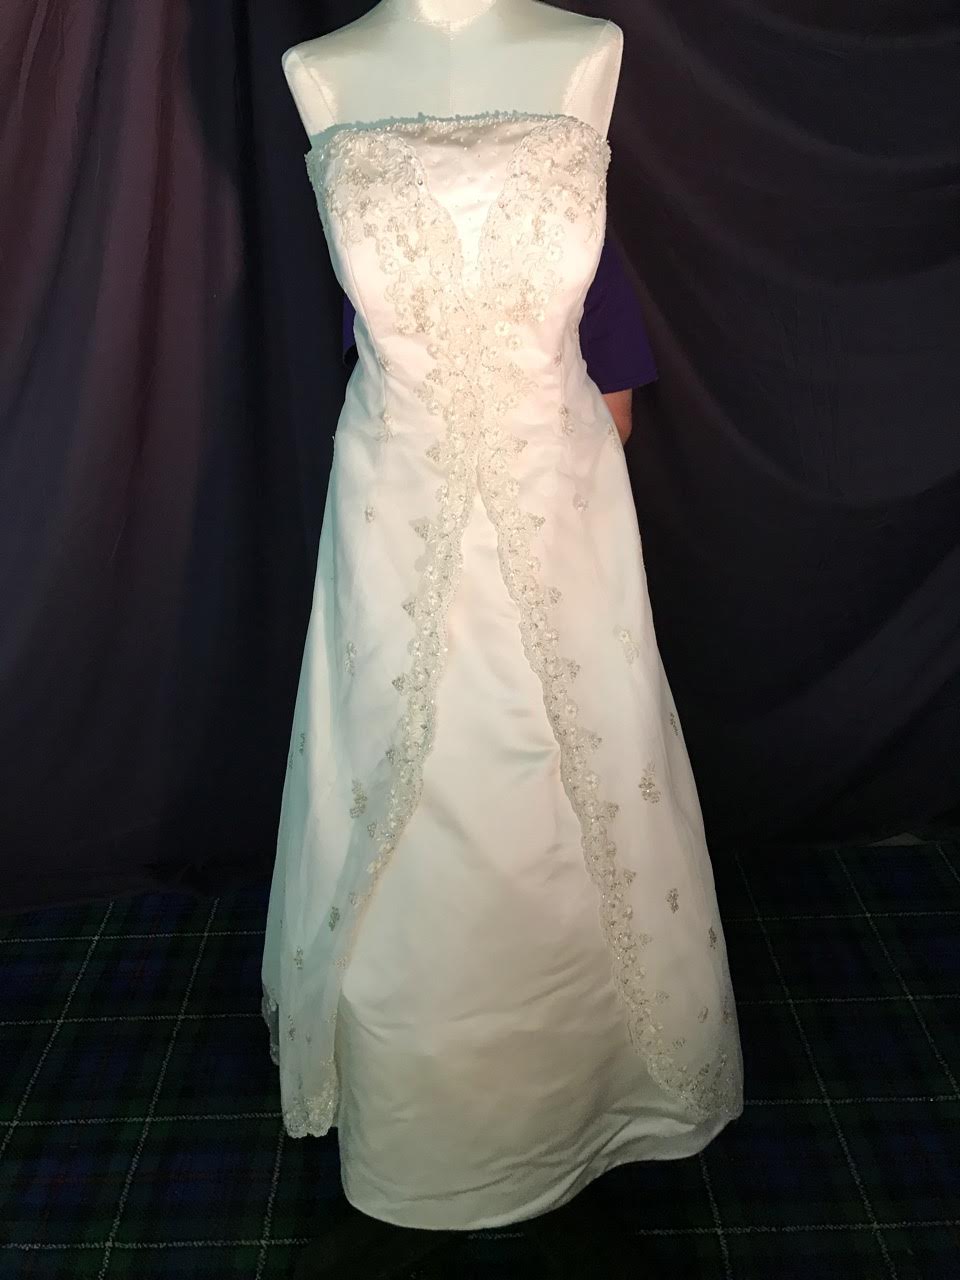 Say Yes to the Dress! | Goodwill Keystone Area Fashion Blog